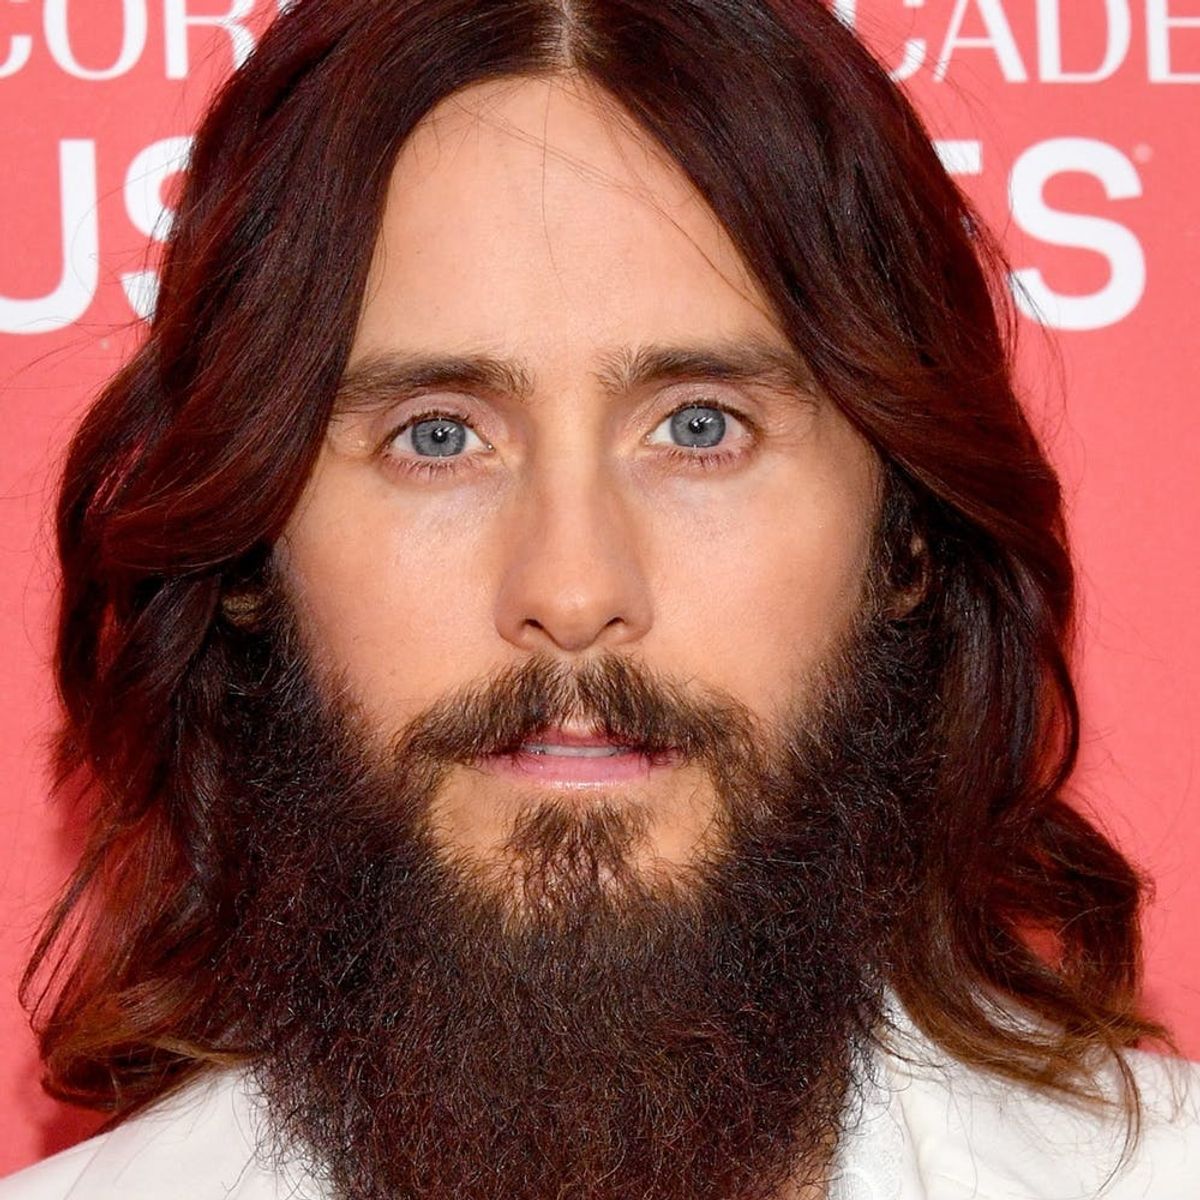 Jared Leto’s New Netflix Flick Is Already Sparking Backlash and It Hasn’t Even Been Released